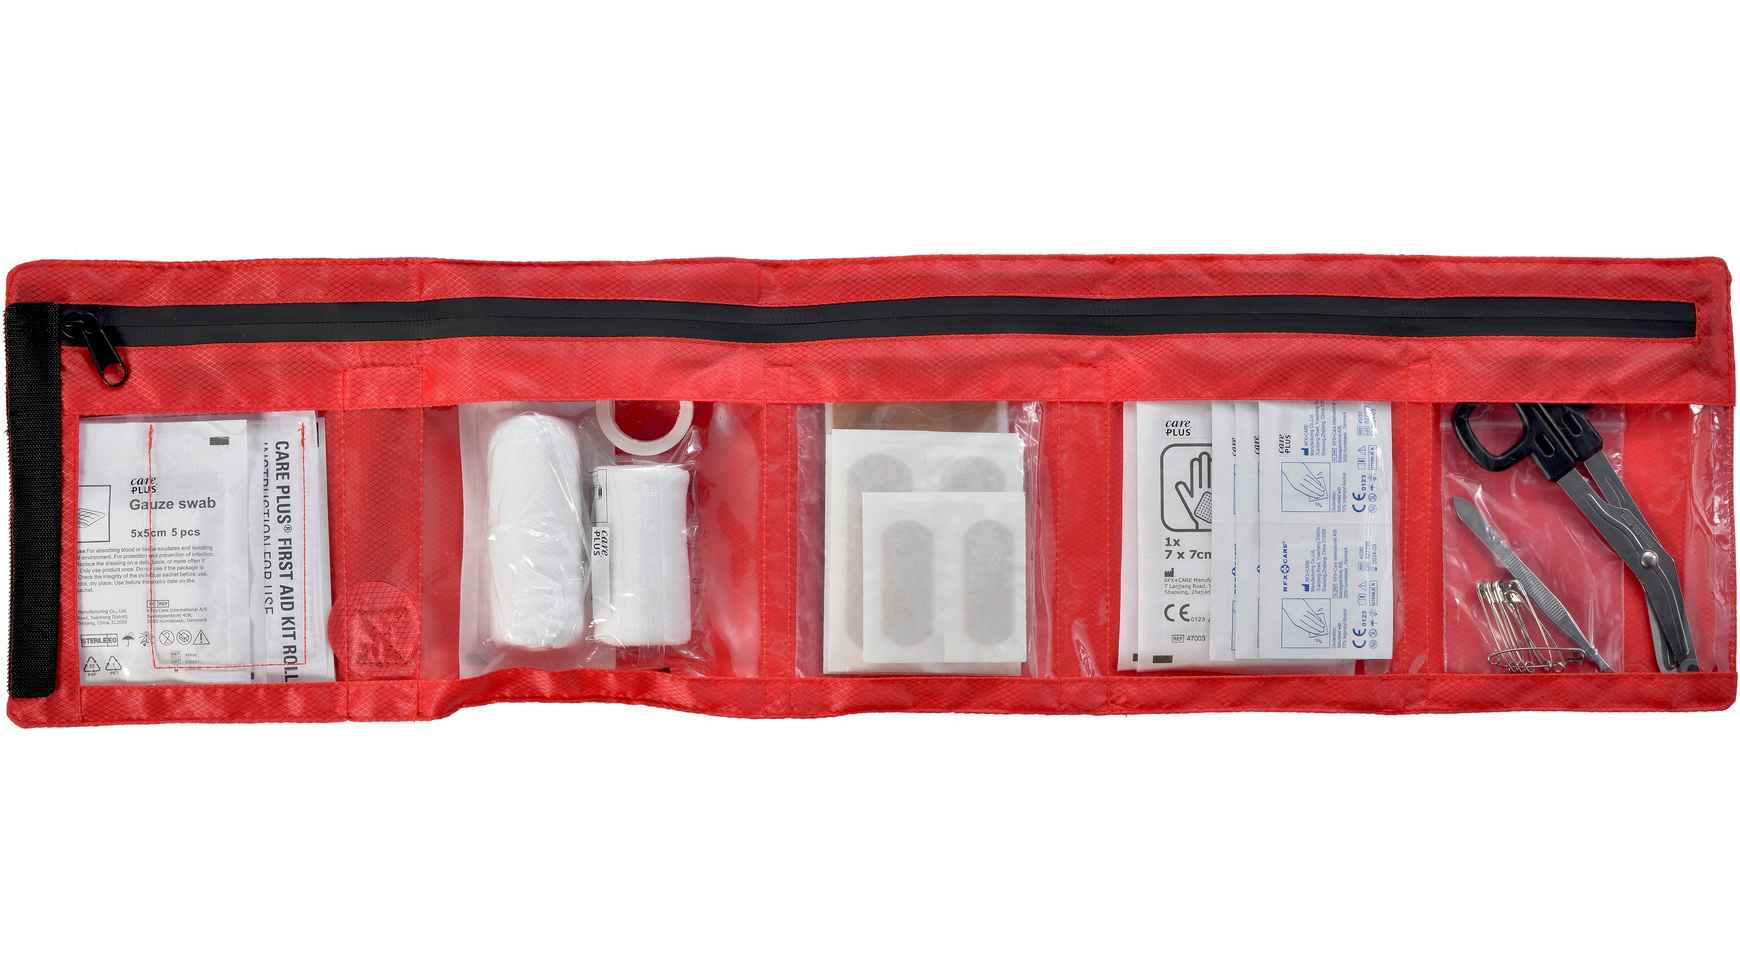 FIRST AID KIT ROLL-OUT, 1. Hilfe Set, Rot